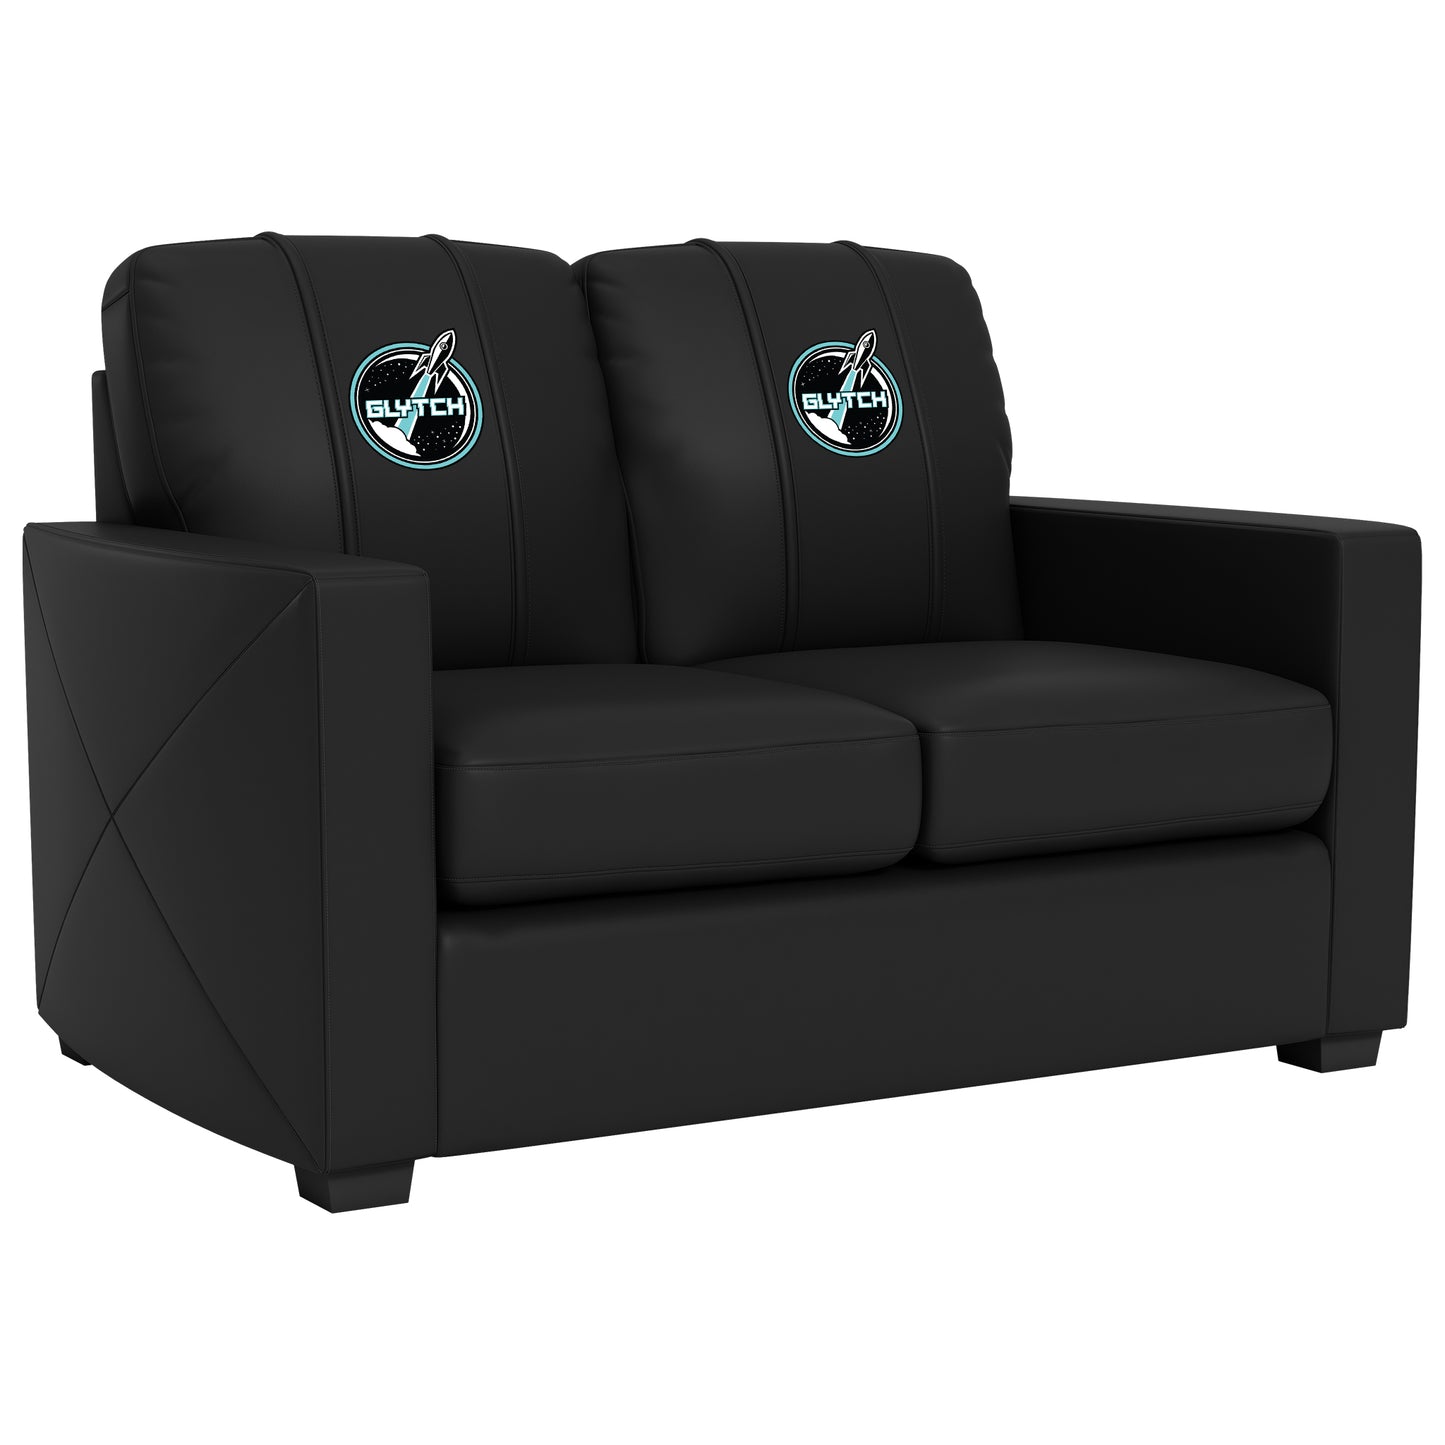 Silver Loveseat with Glytch Primary Logo